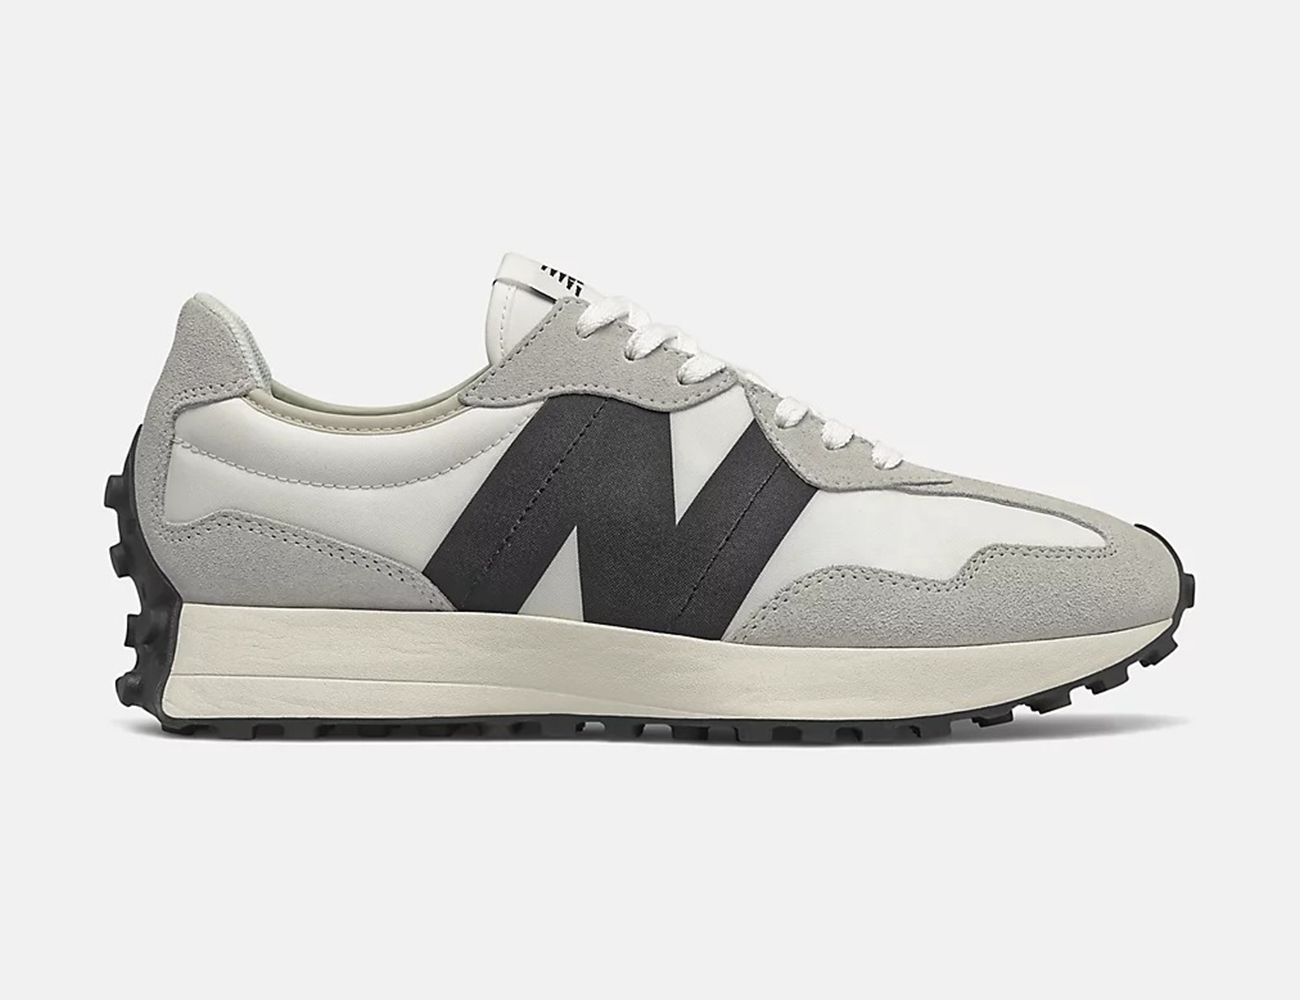 Derivar Buen sentimiento oferta The Complete Guide to New Balance Sneakers: All Styles, Explained